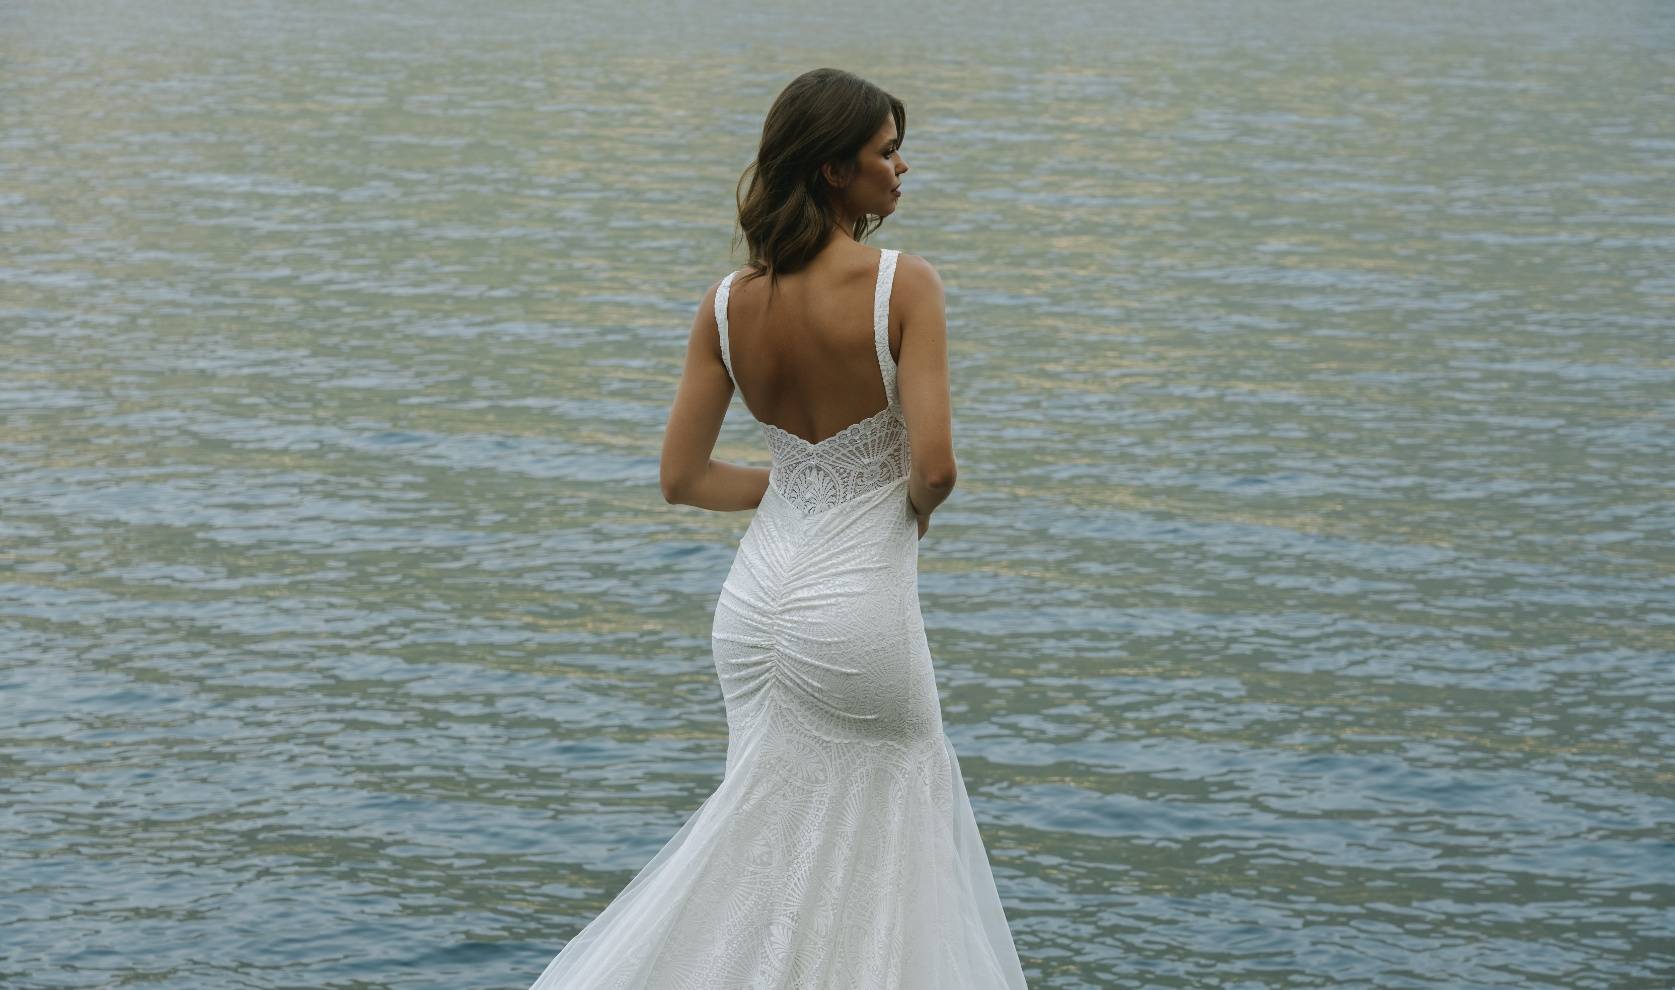 Model in Sienna gown with ocean in background